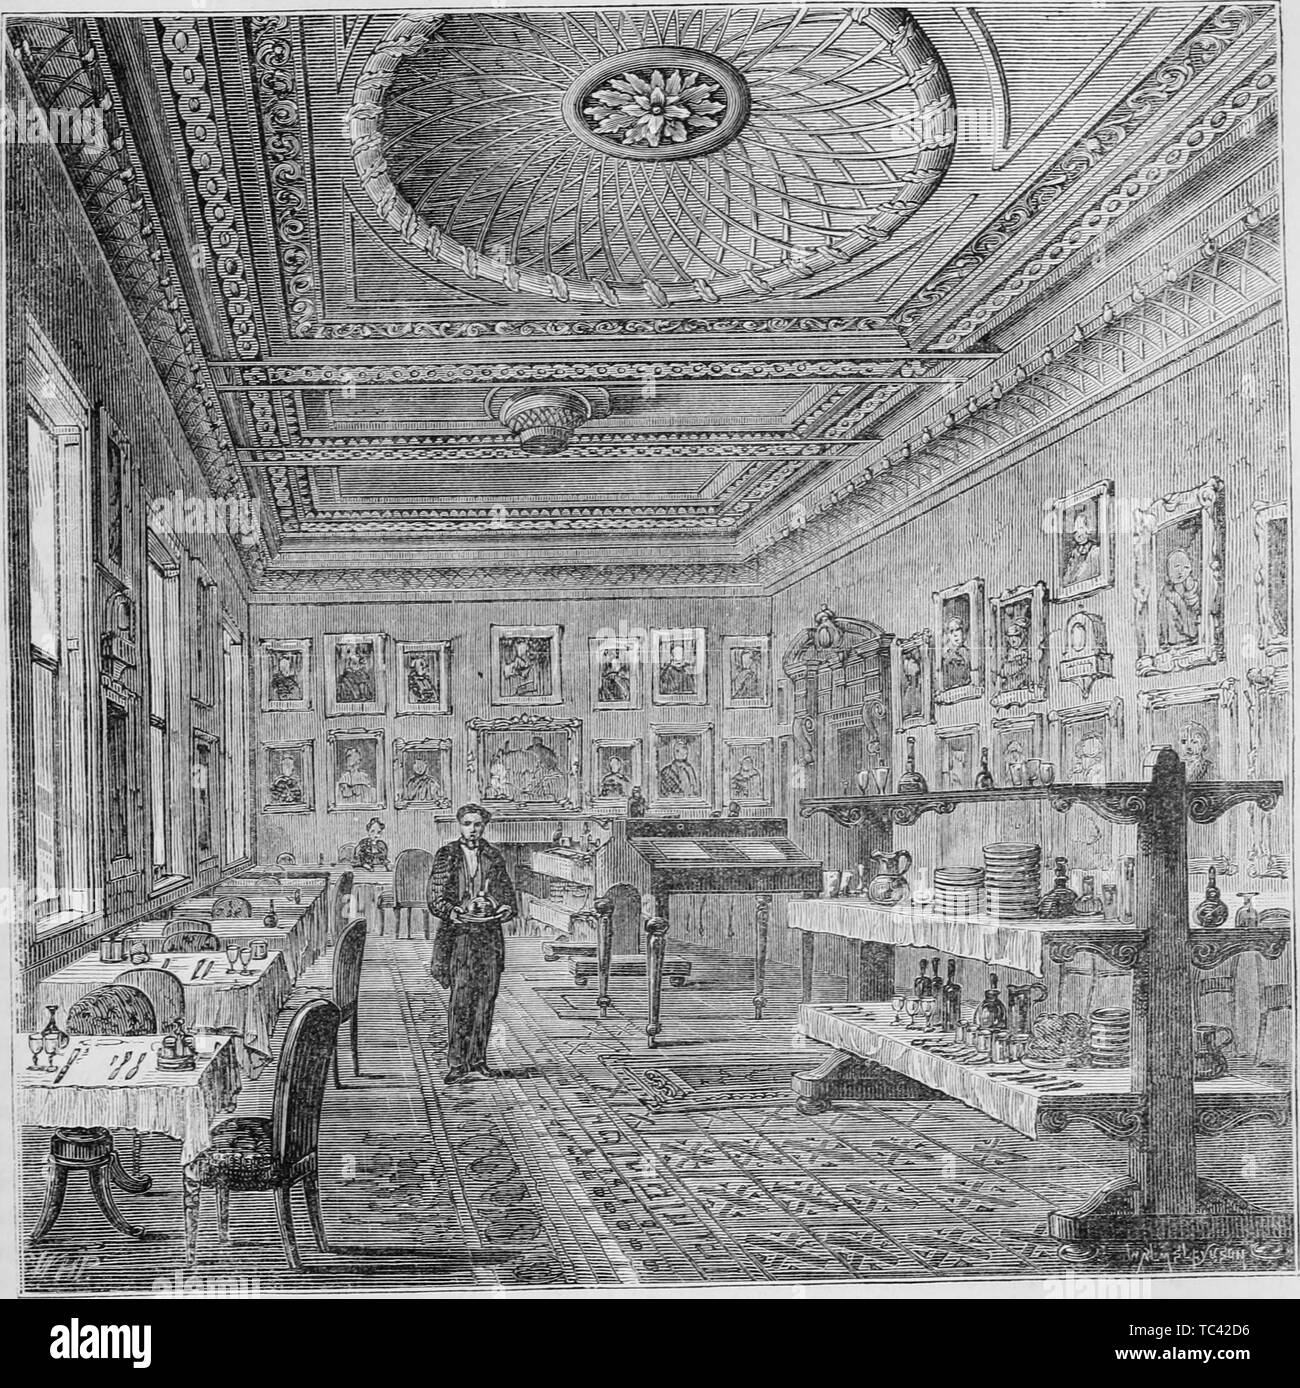 Engraving of the dining room at the Garrick Club, London, England, from the book 'Old and new London: a narrative of its history, its people, and its places' by Thornbury Walter, 1873. Courtesy Internet Archive. () Stock Photo